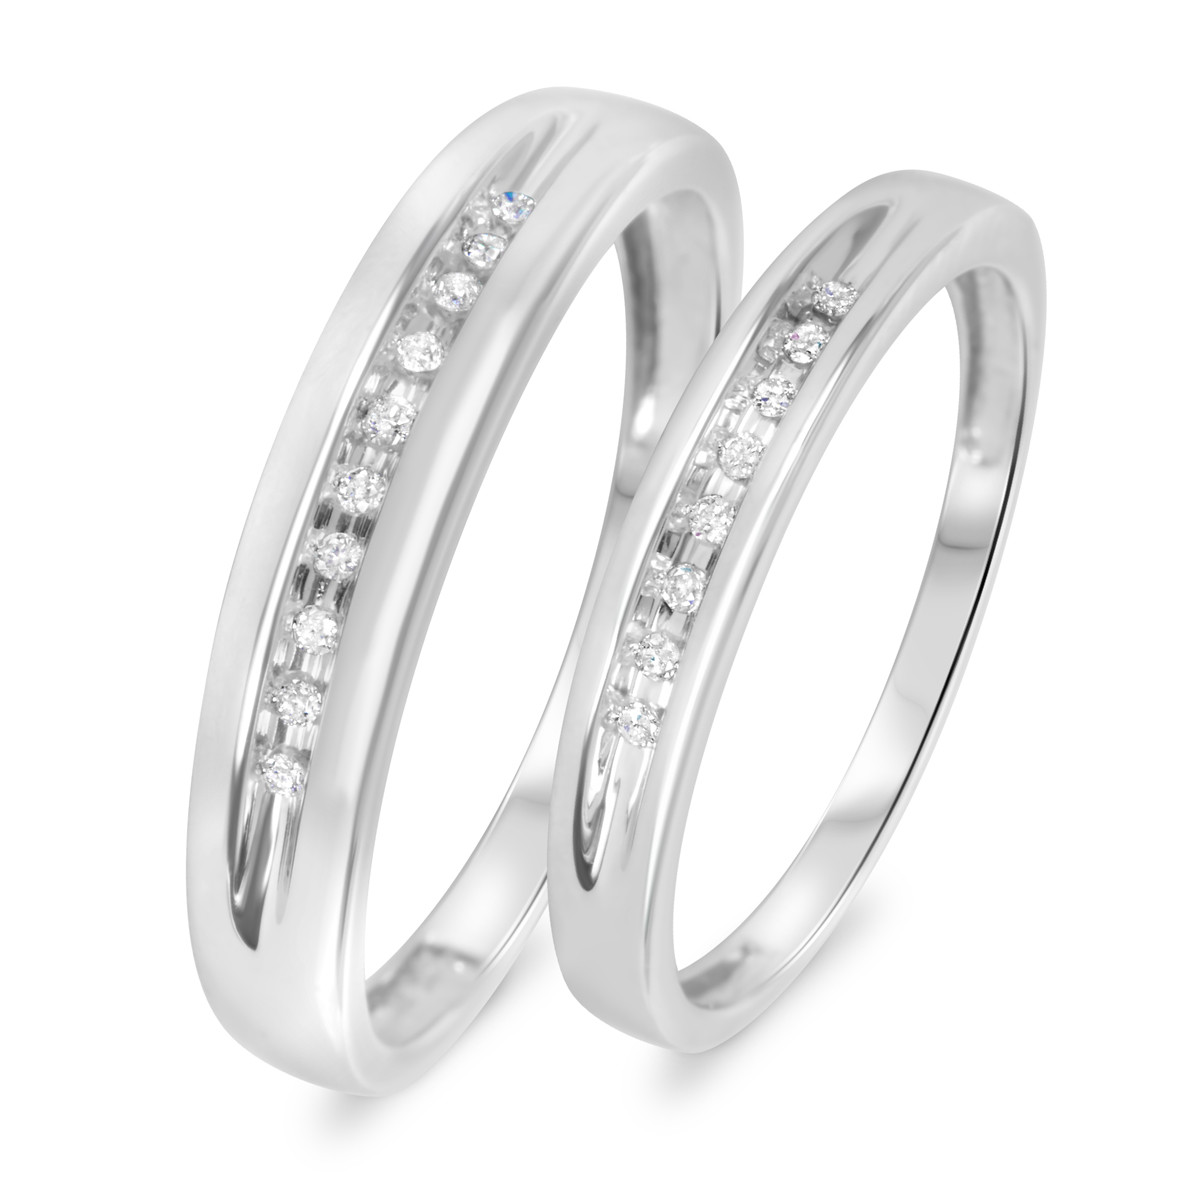 His And Hers Wedding Rings White Gold
 1 10 Carat T W Diamond His And Hers Wedding Rings 10K